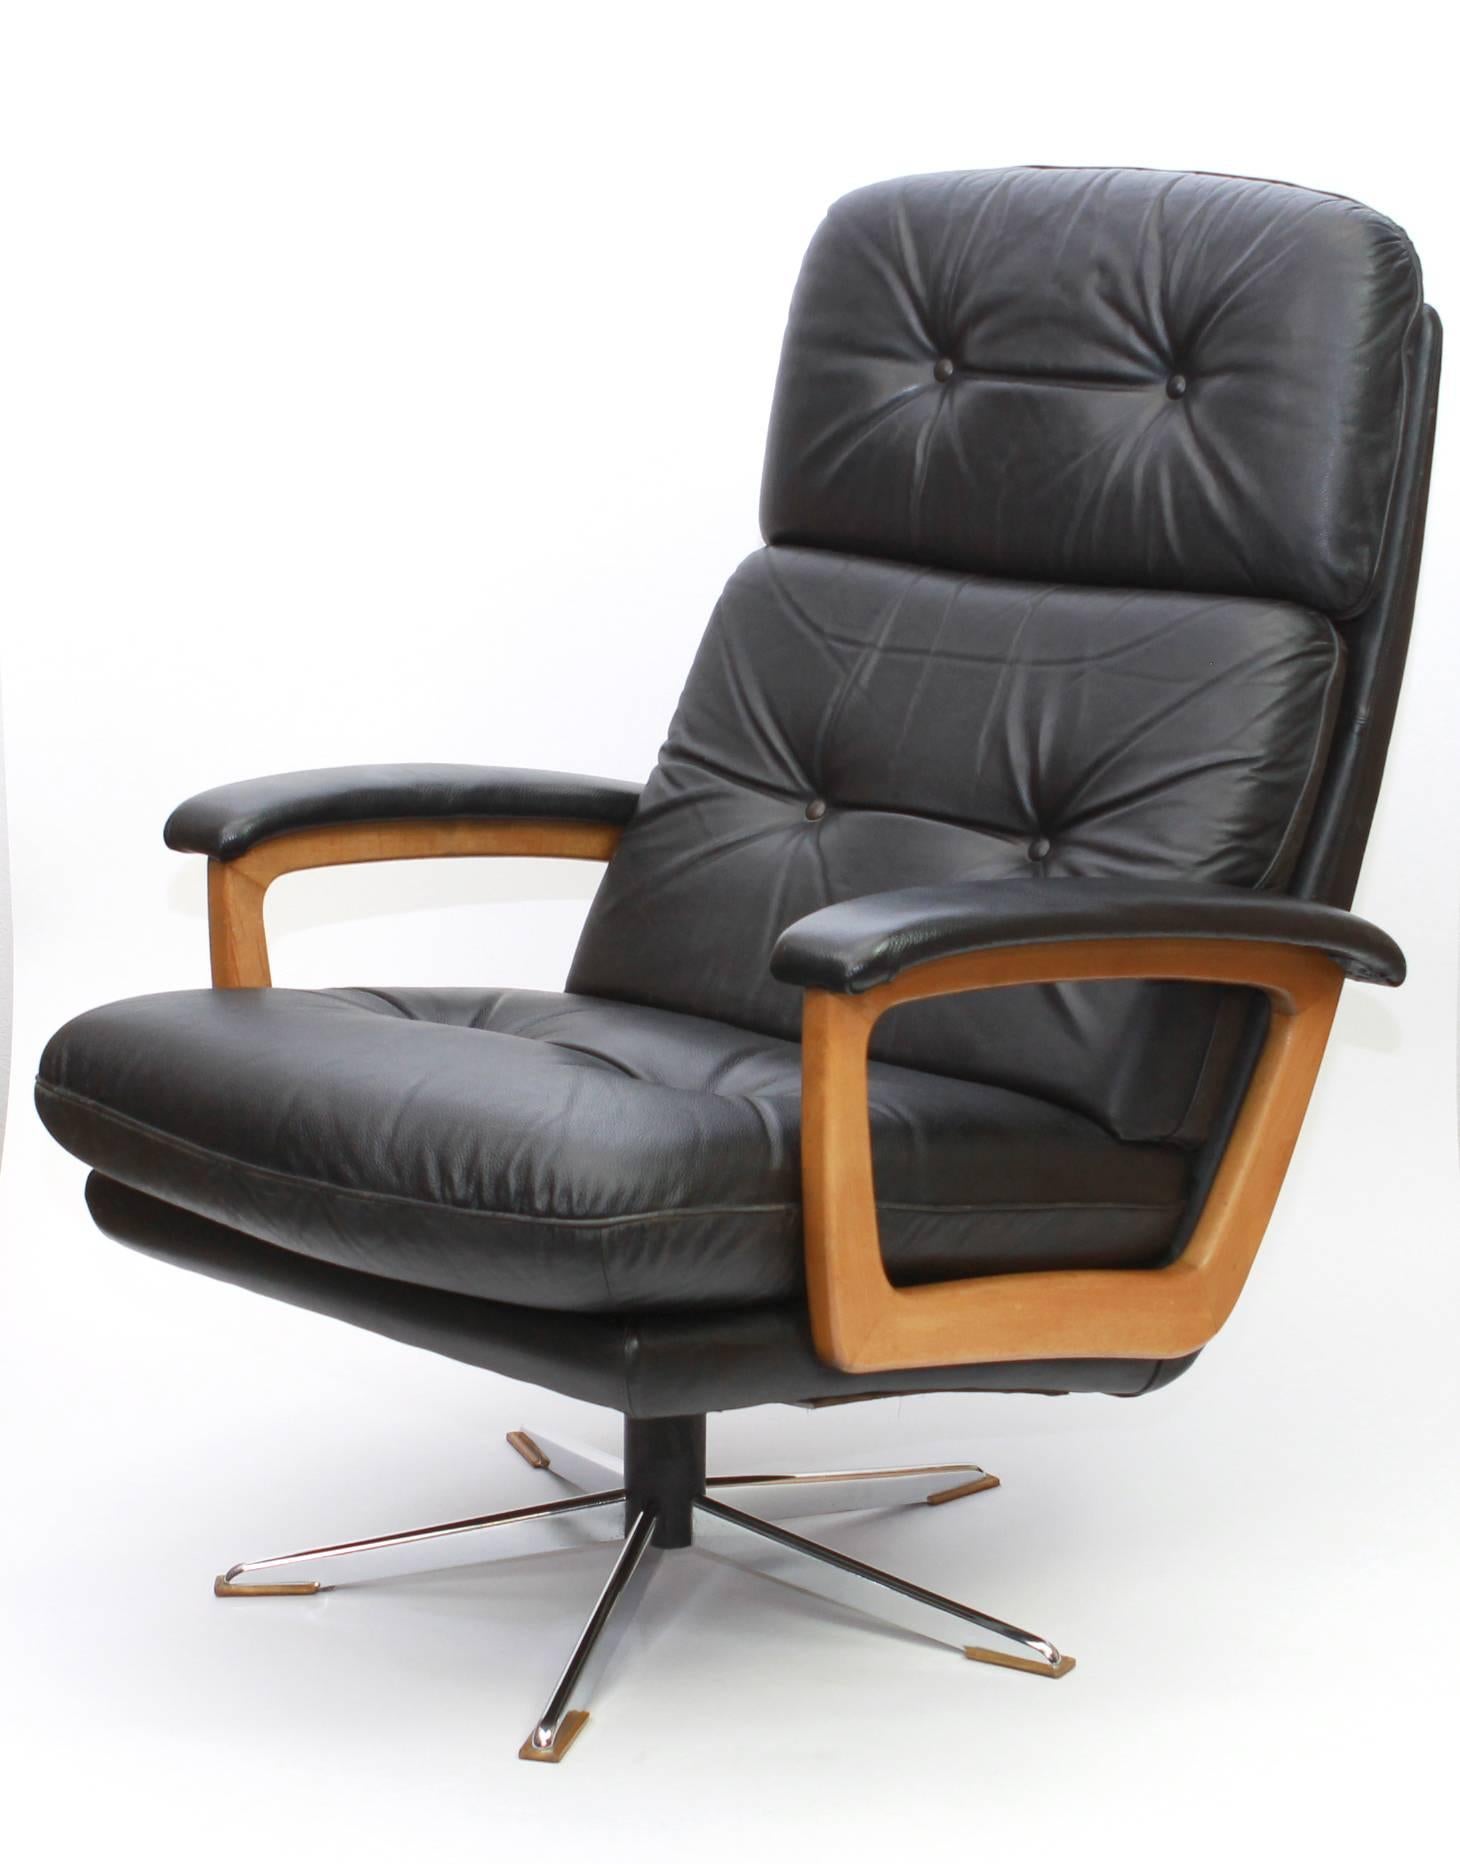 Black leather lounge chair by Lübke / The Company is now called COR.
manufactured in Germany, in 1970s.
This Company used to manufacture the Conference Seats for the Bundestag in Bonn.
The piece sits on chrome swivel legs. 
High quality and very